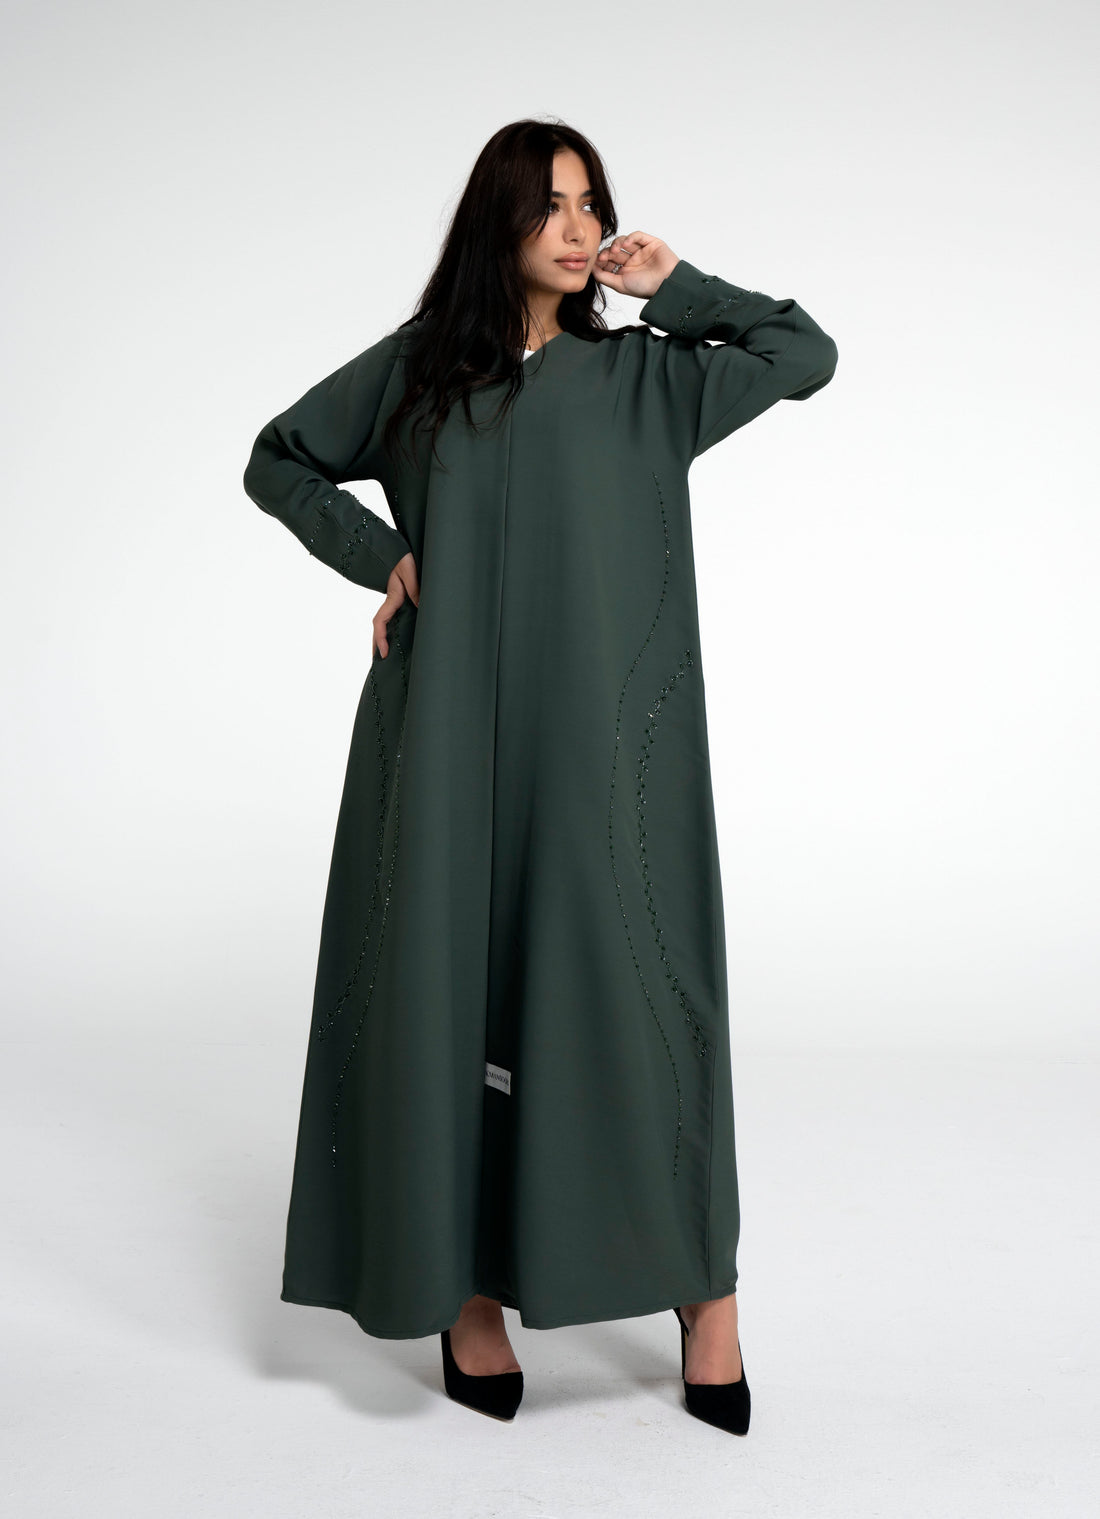 How To Style These Fabulous Green Abayas?